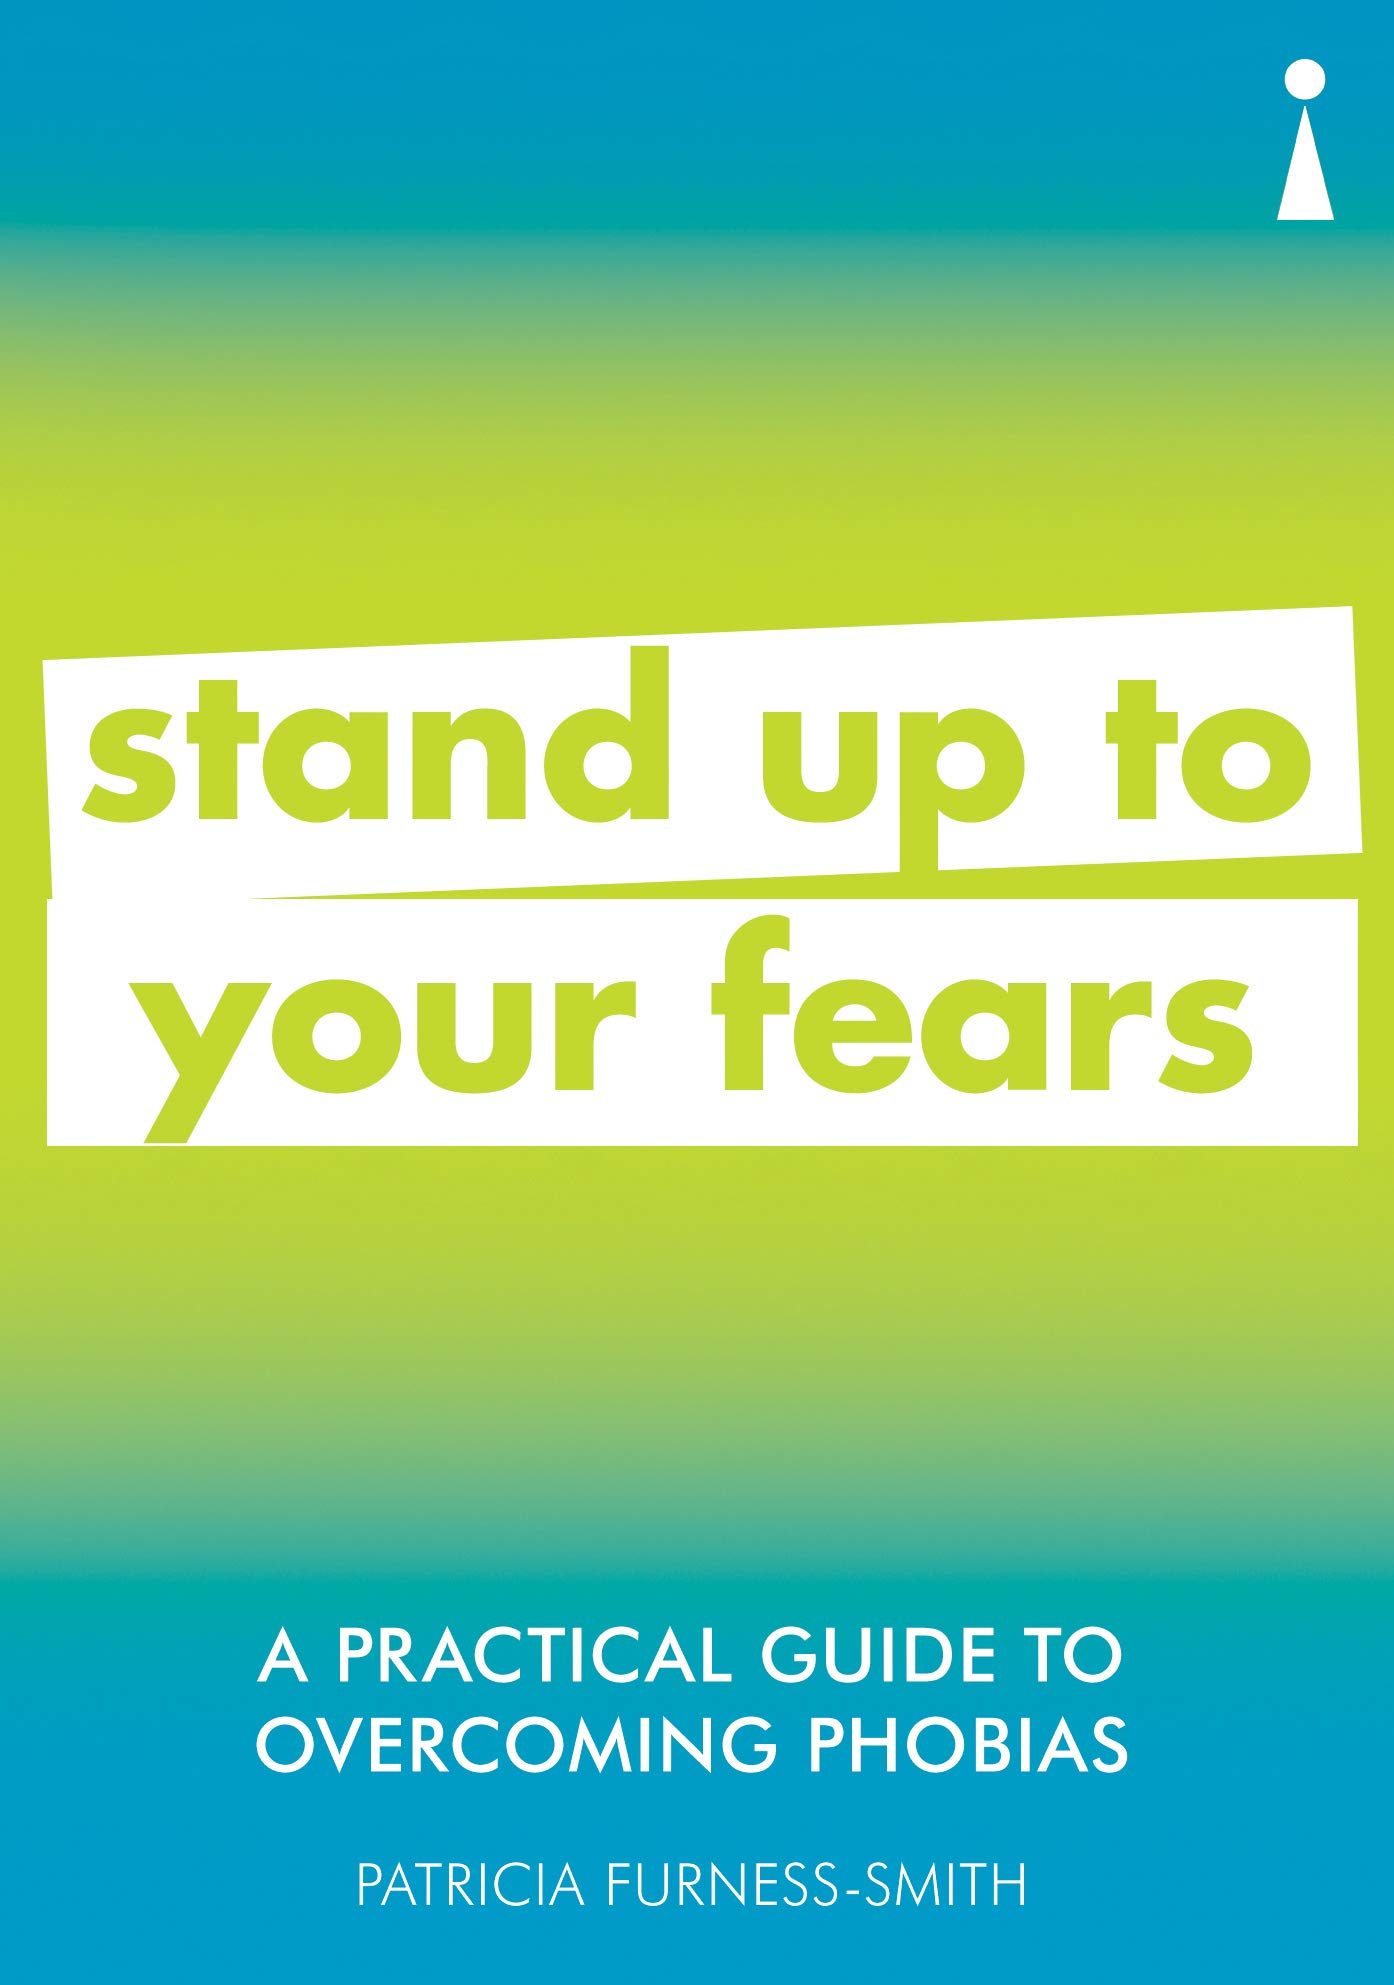 Practical Guide to Overcoming Phobias | Patricia Furness-Smith